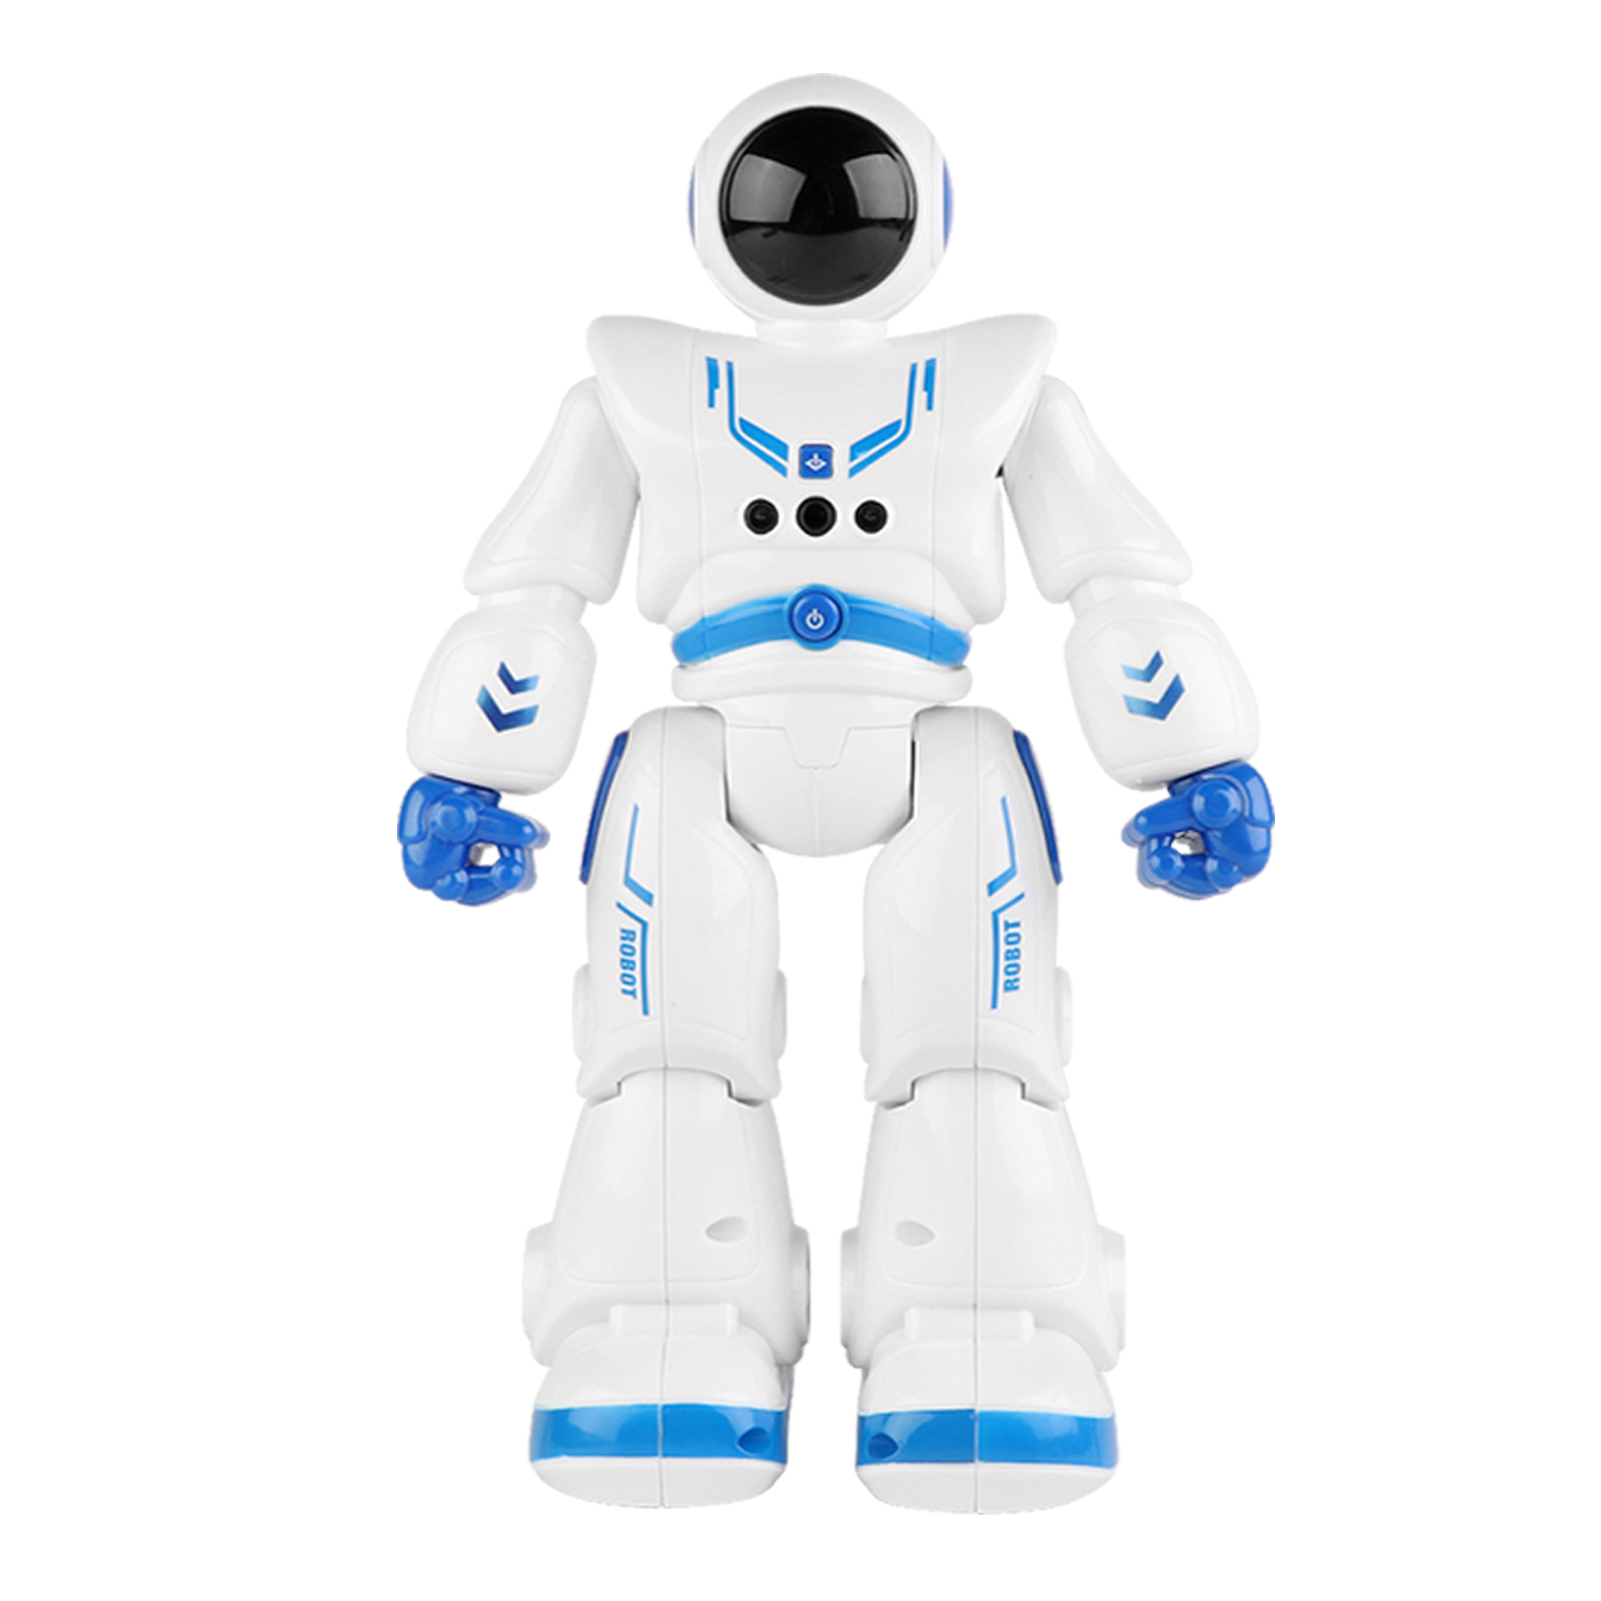 Dcenta Smart Intelligent Robot Toy (Blue and White) - image 6 of 7